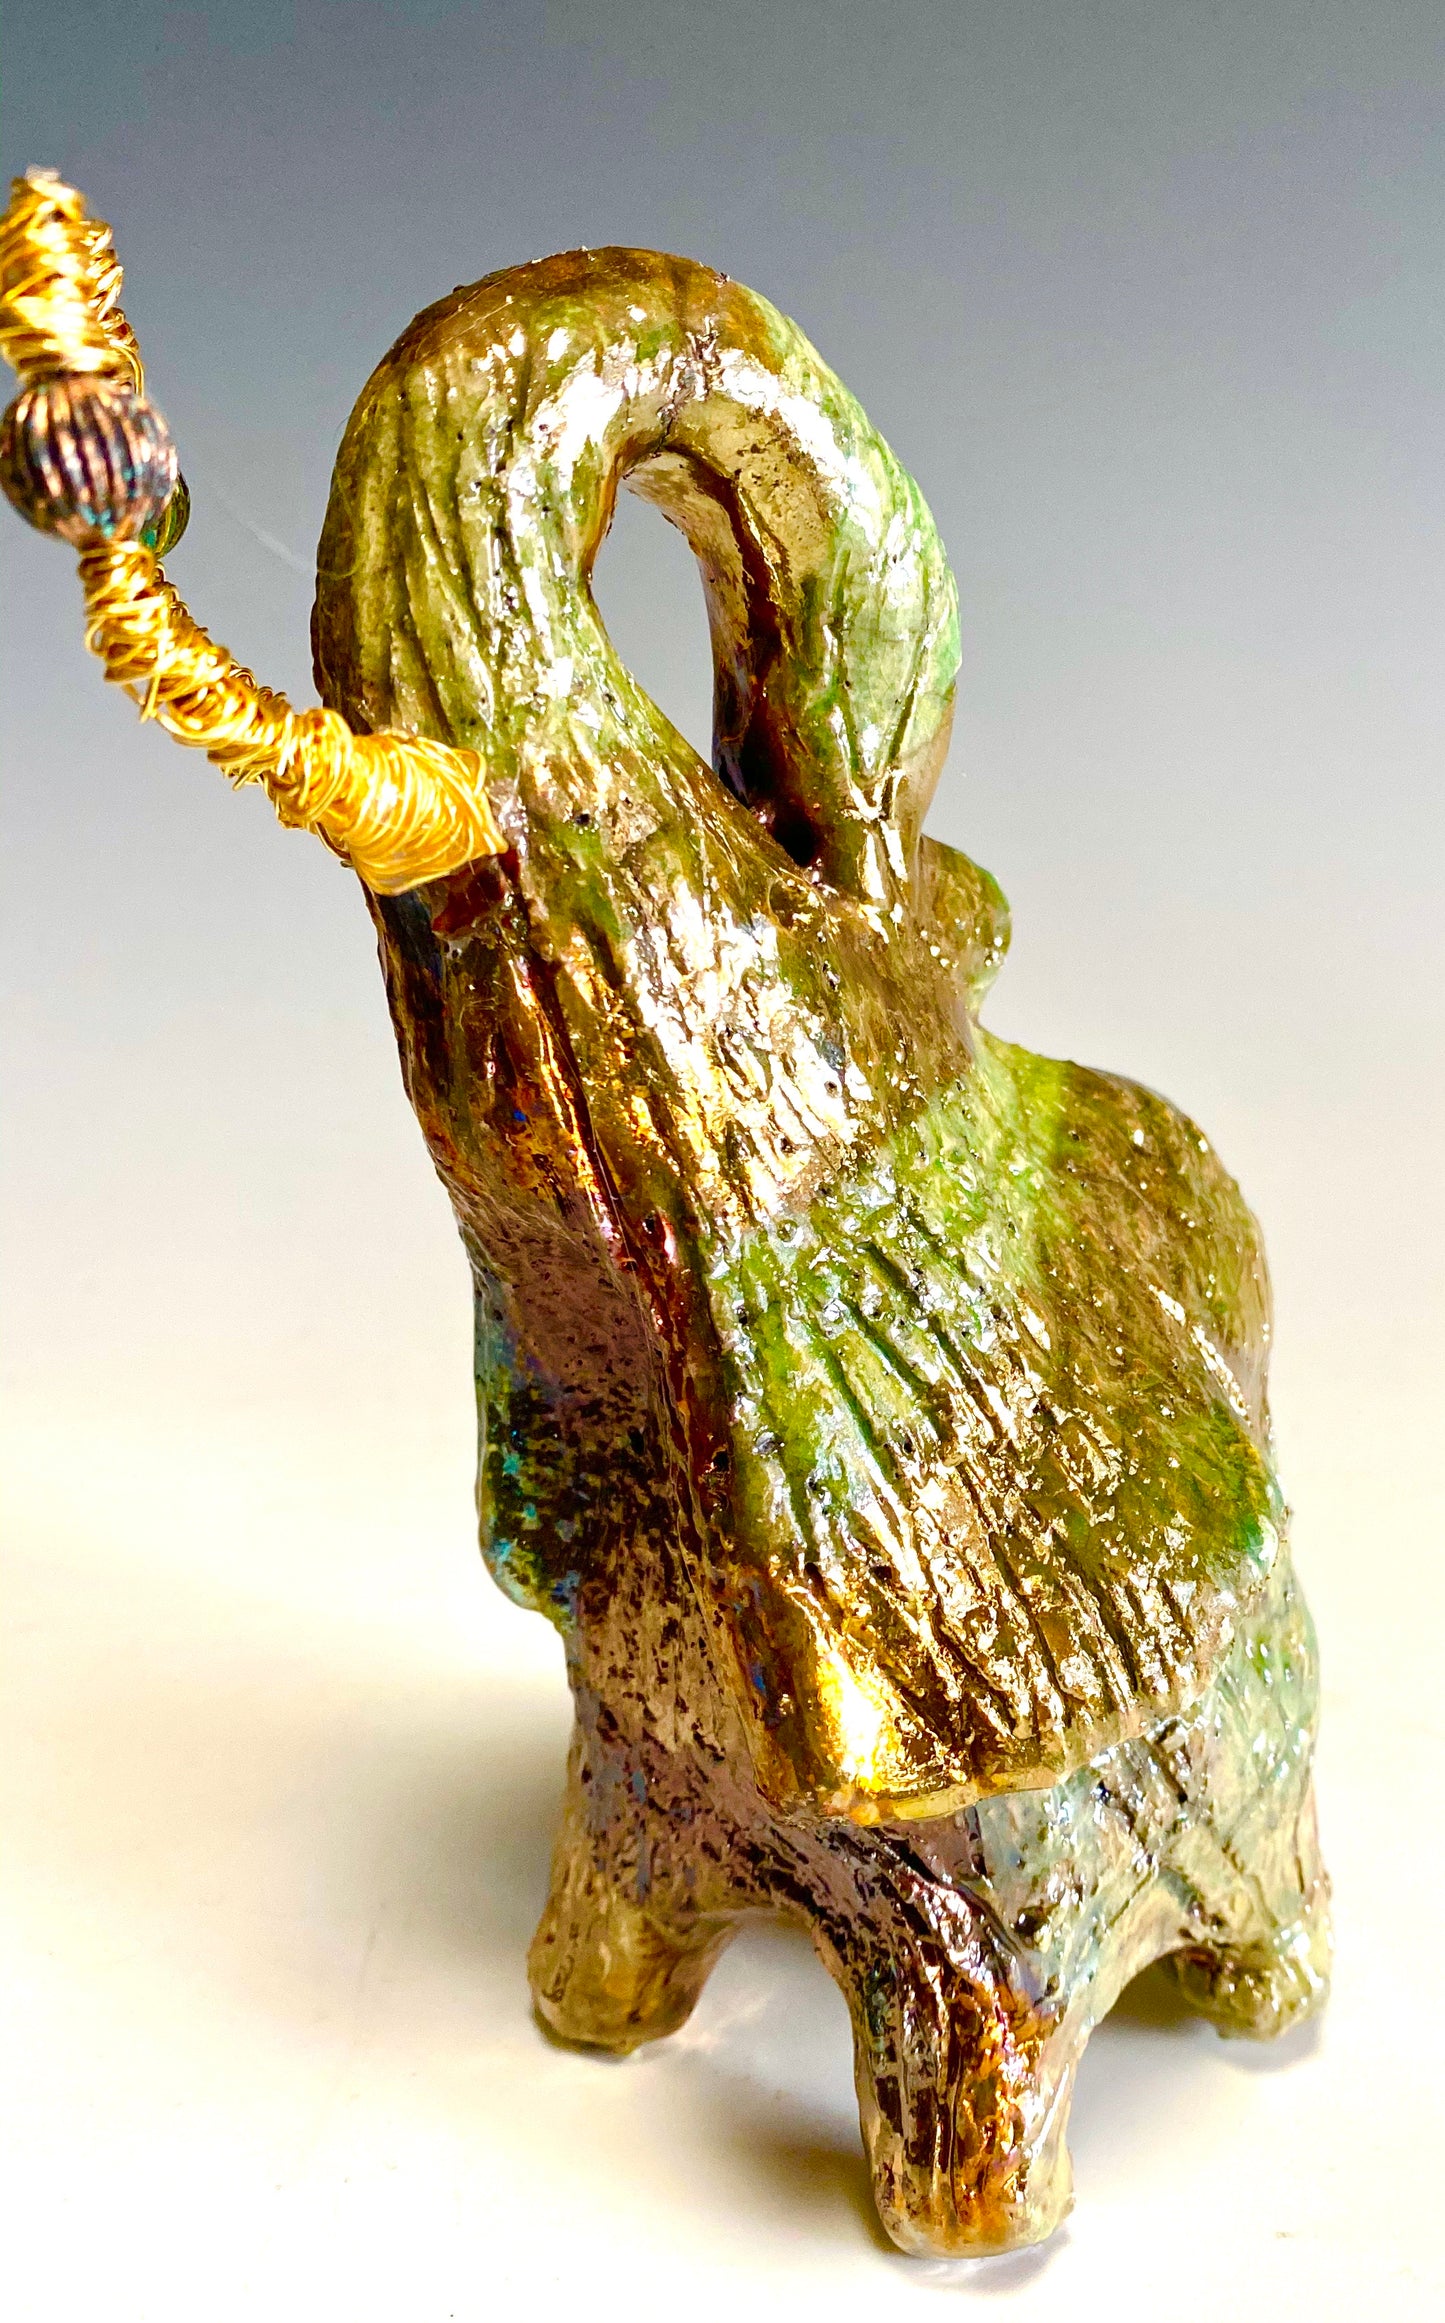 Raku Elephant Have you HERD!!!!!!  Just one of these lovely Raku Fired Elephant will make an excellent gift for your  friend, sorority or for your home’ special place centerpiece.  6" x 4" x 5" 14 ozs. Beautiful copper, green and gold metallic raku elephant  Gold beaded tusk  For decorative purposely only.